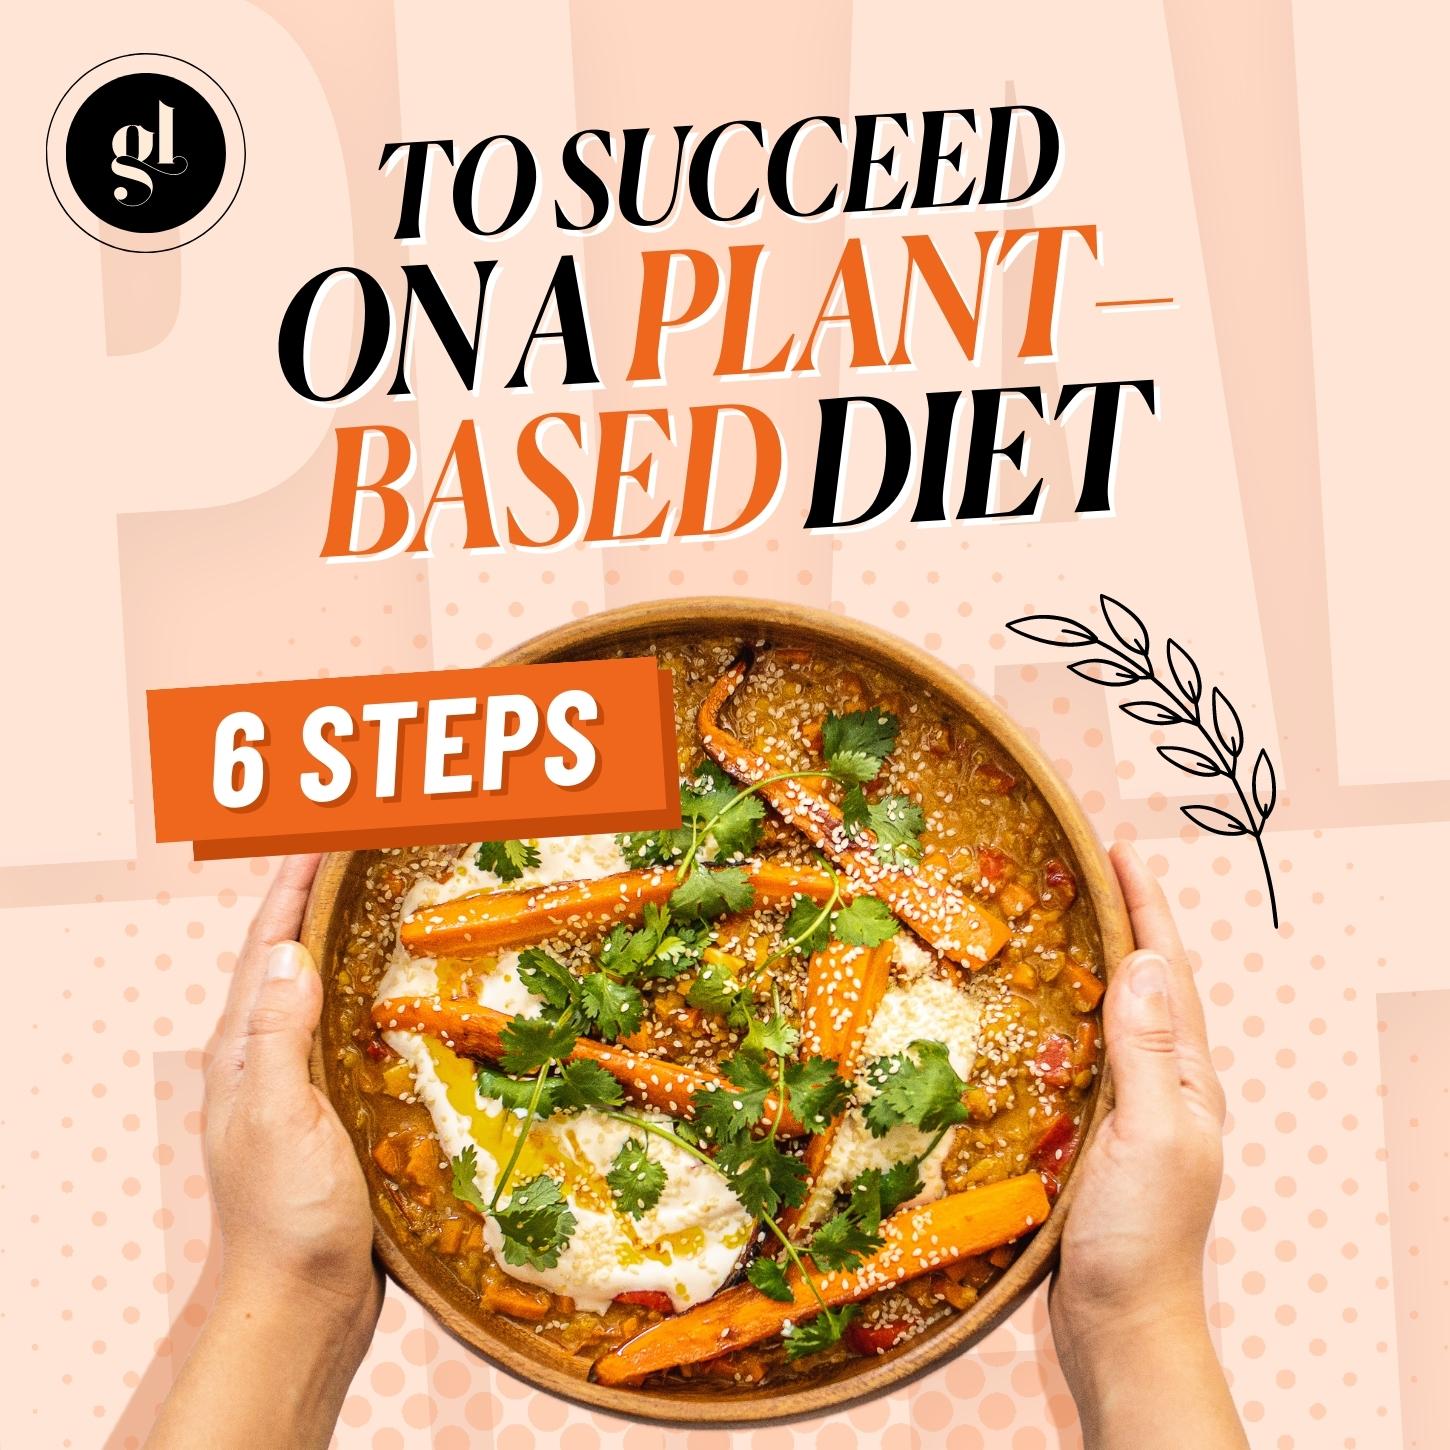 6 Steps to Succeed on a Plant-Based Diet